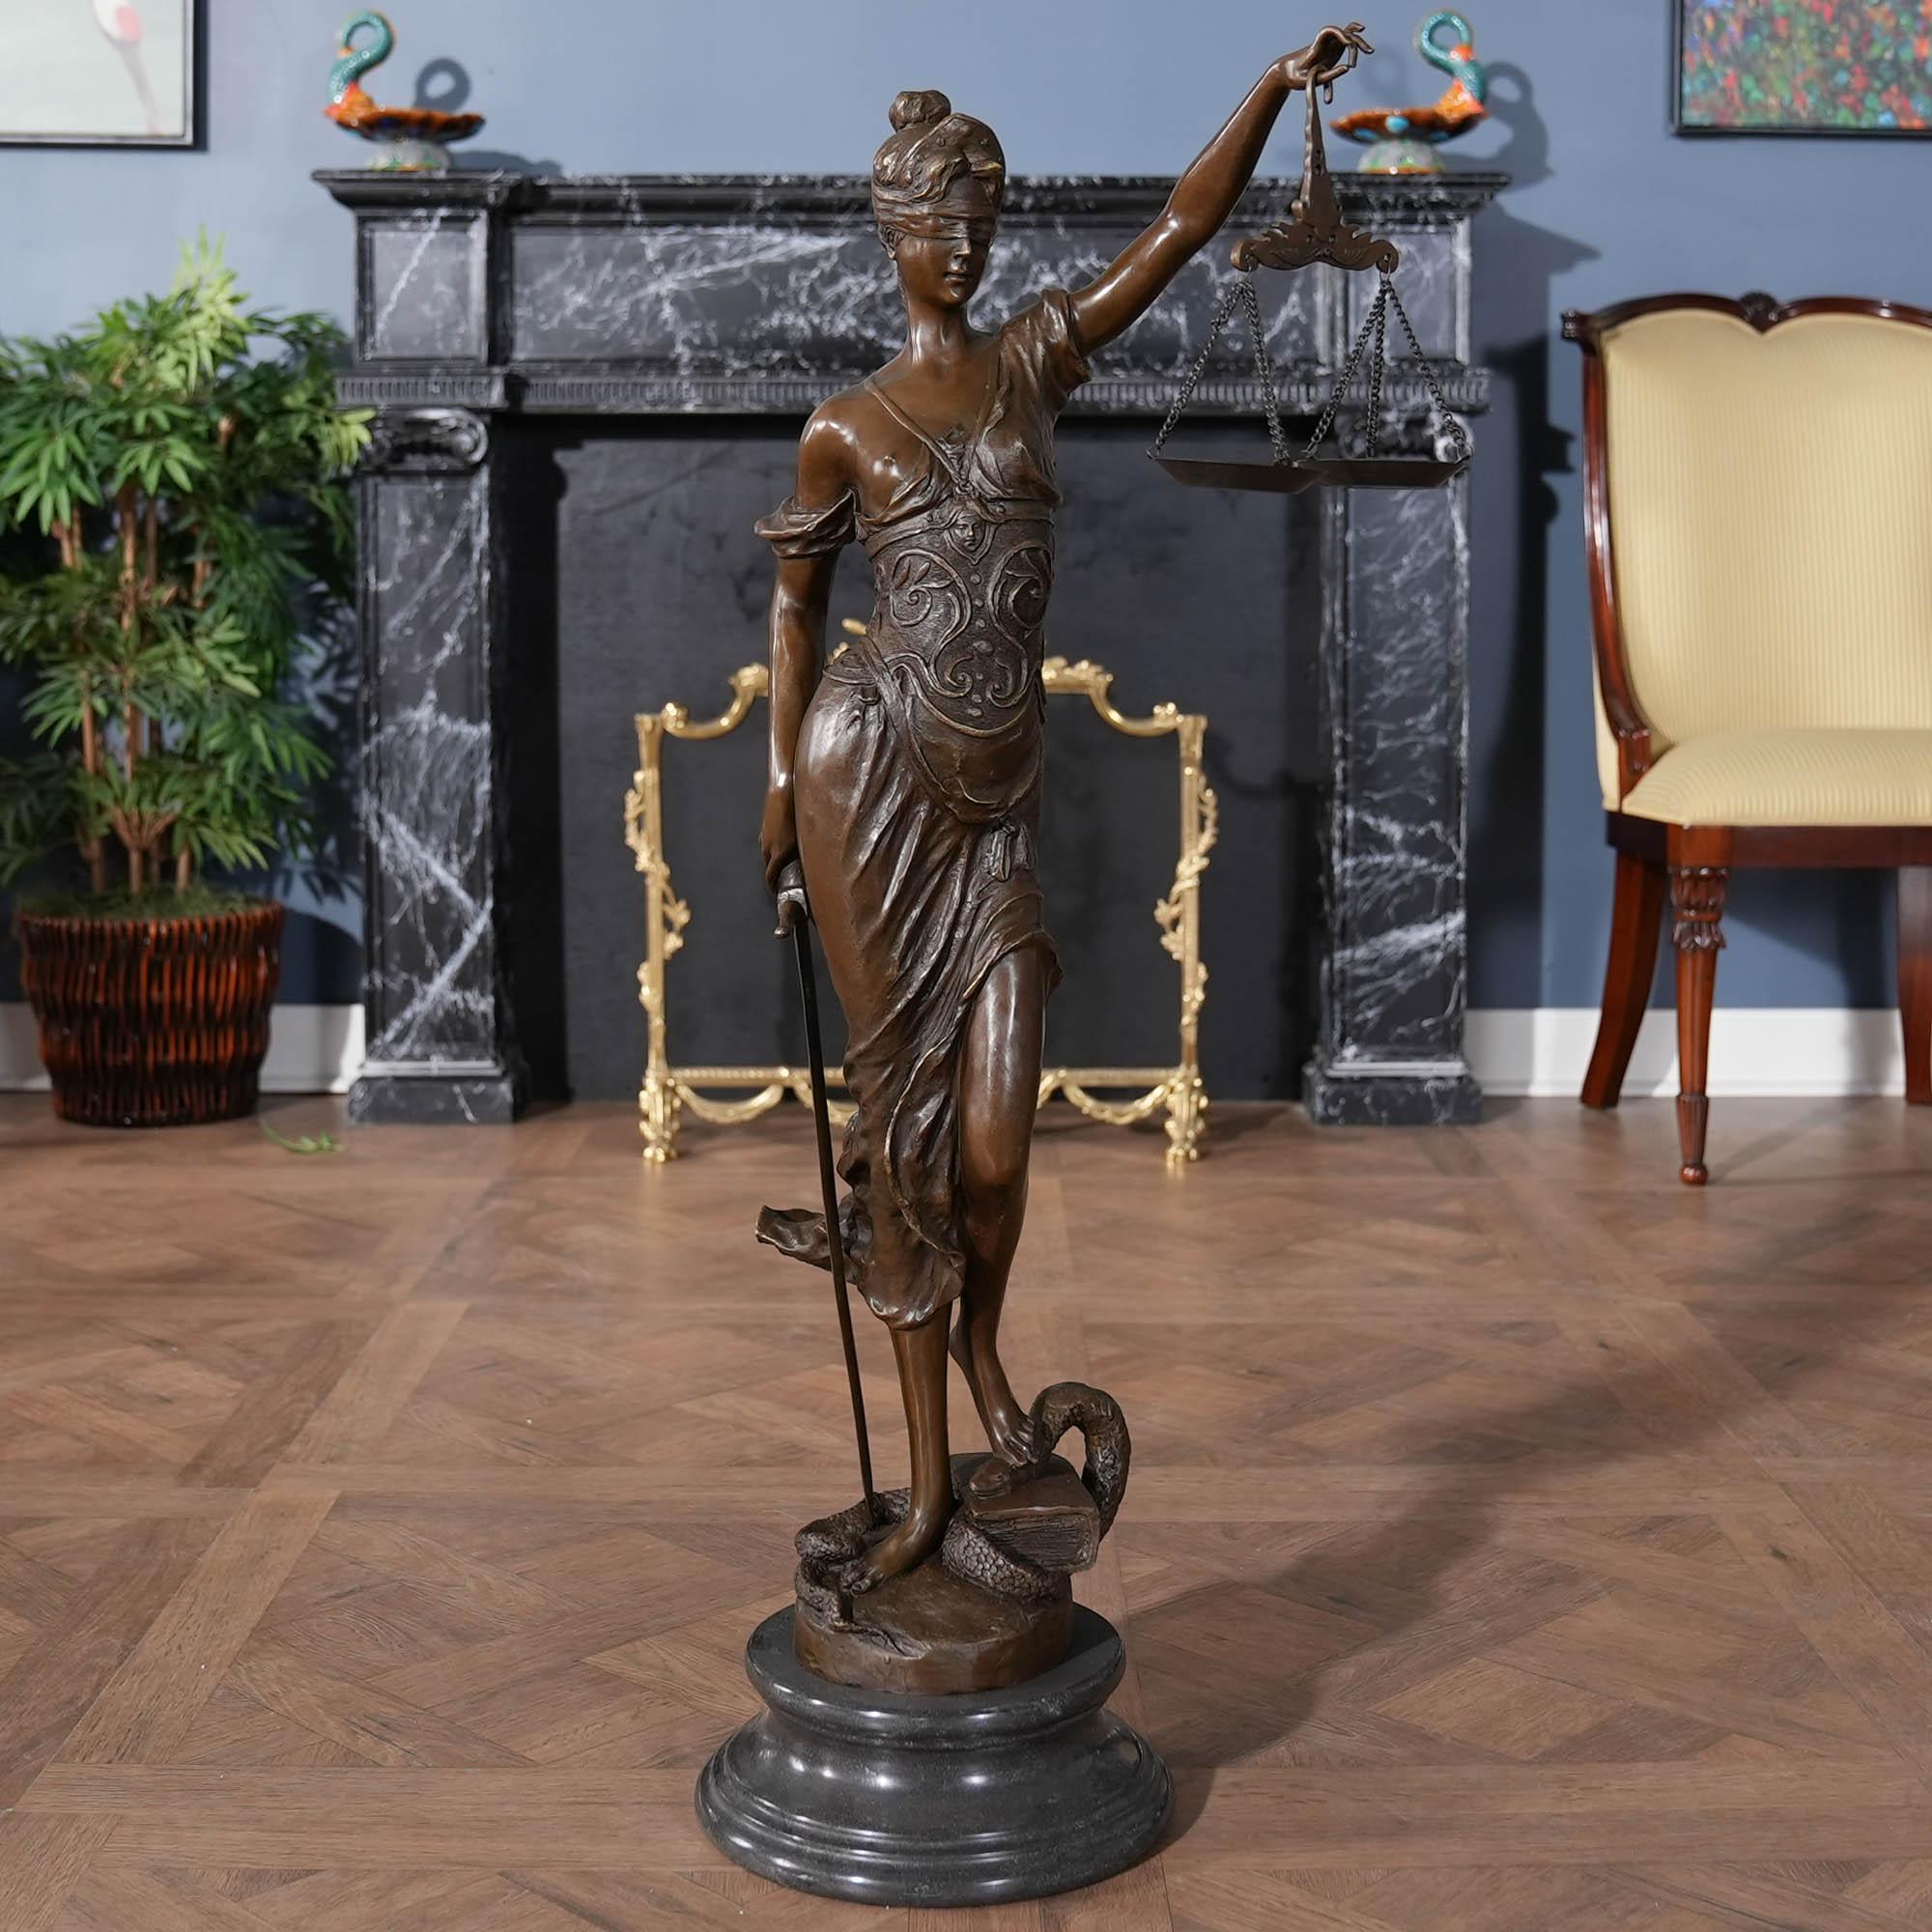 Graceful even when standing still the Bronze Justice with Scales on Marble Base is a striking addition to any setting. Using traditional lost wax casting methods the Bronze Justice statue has hand chaised details added to give a high level of detail